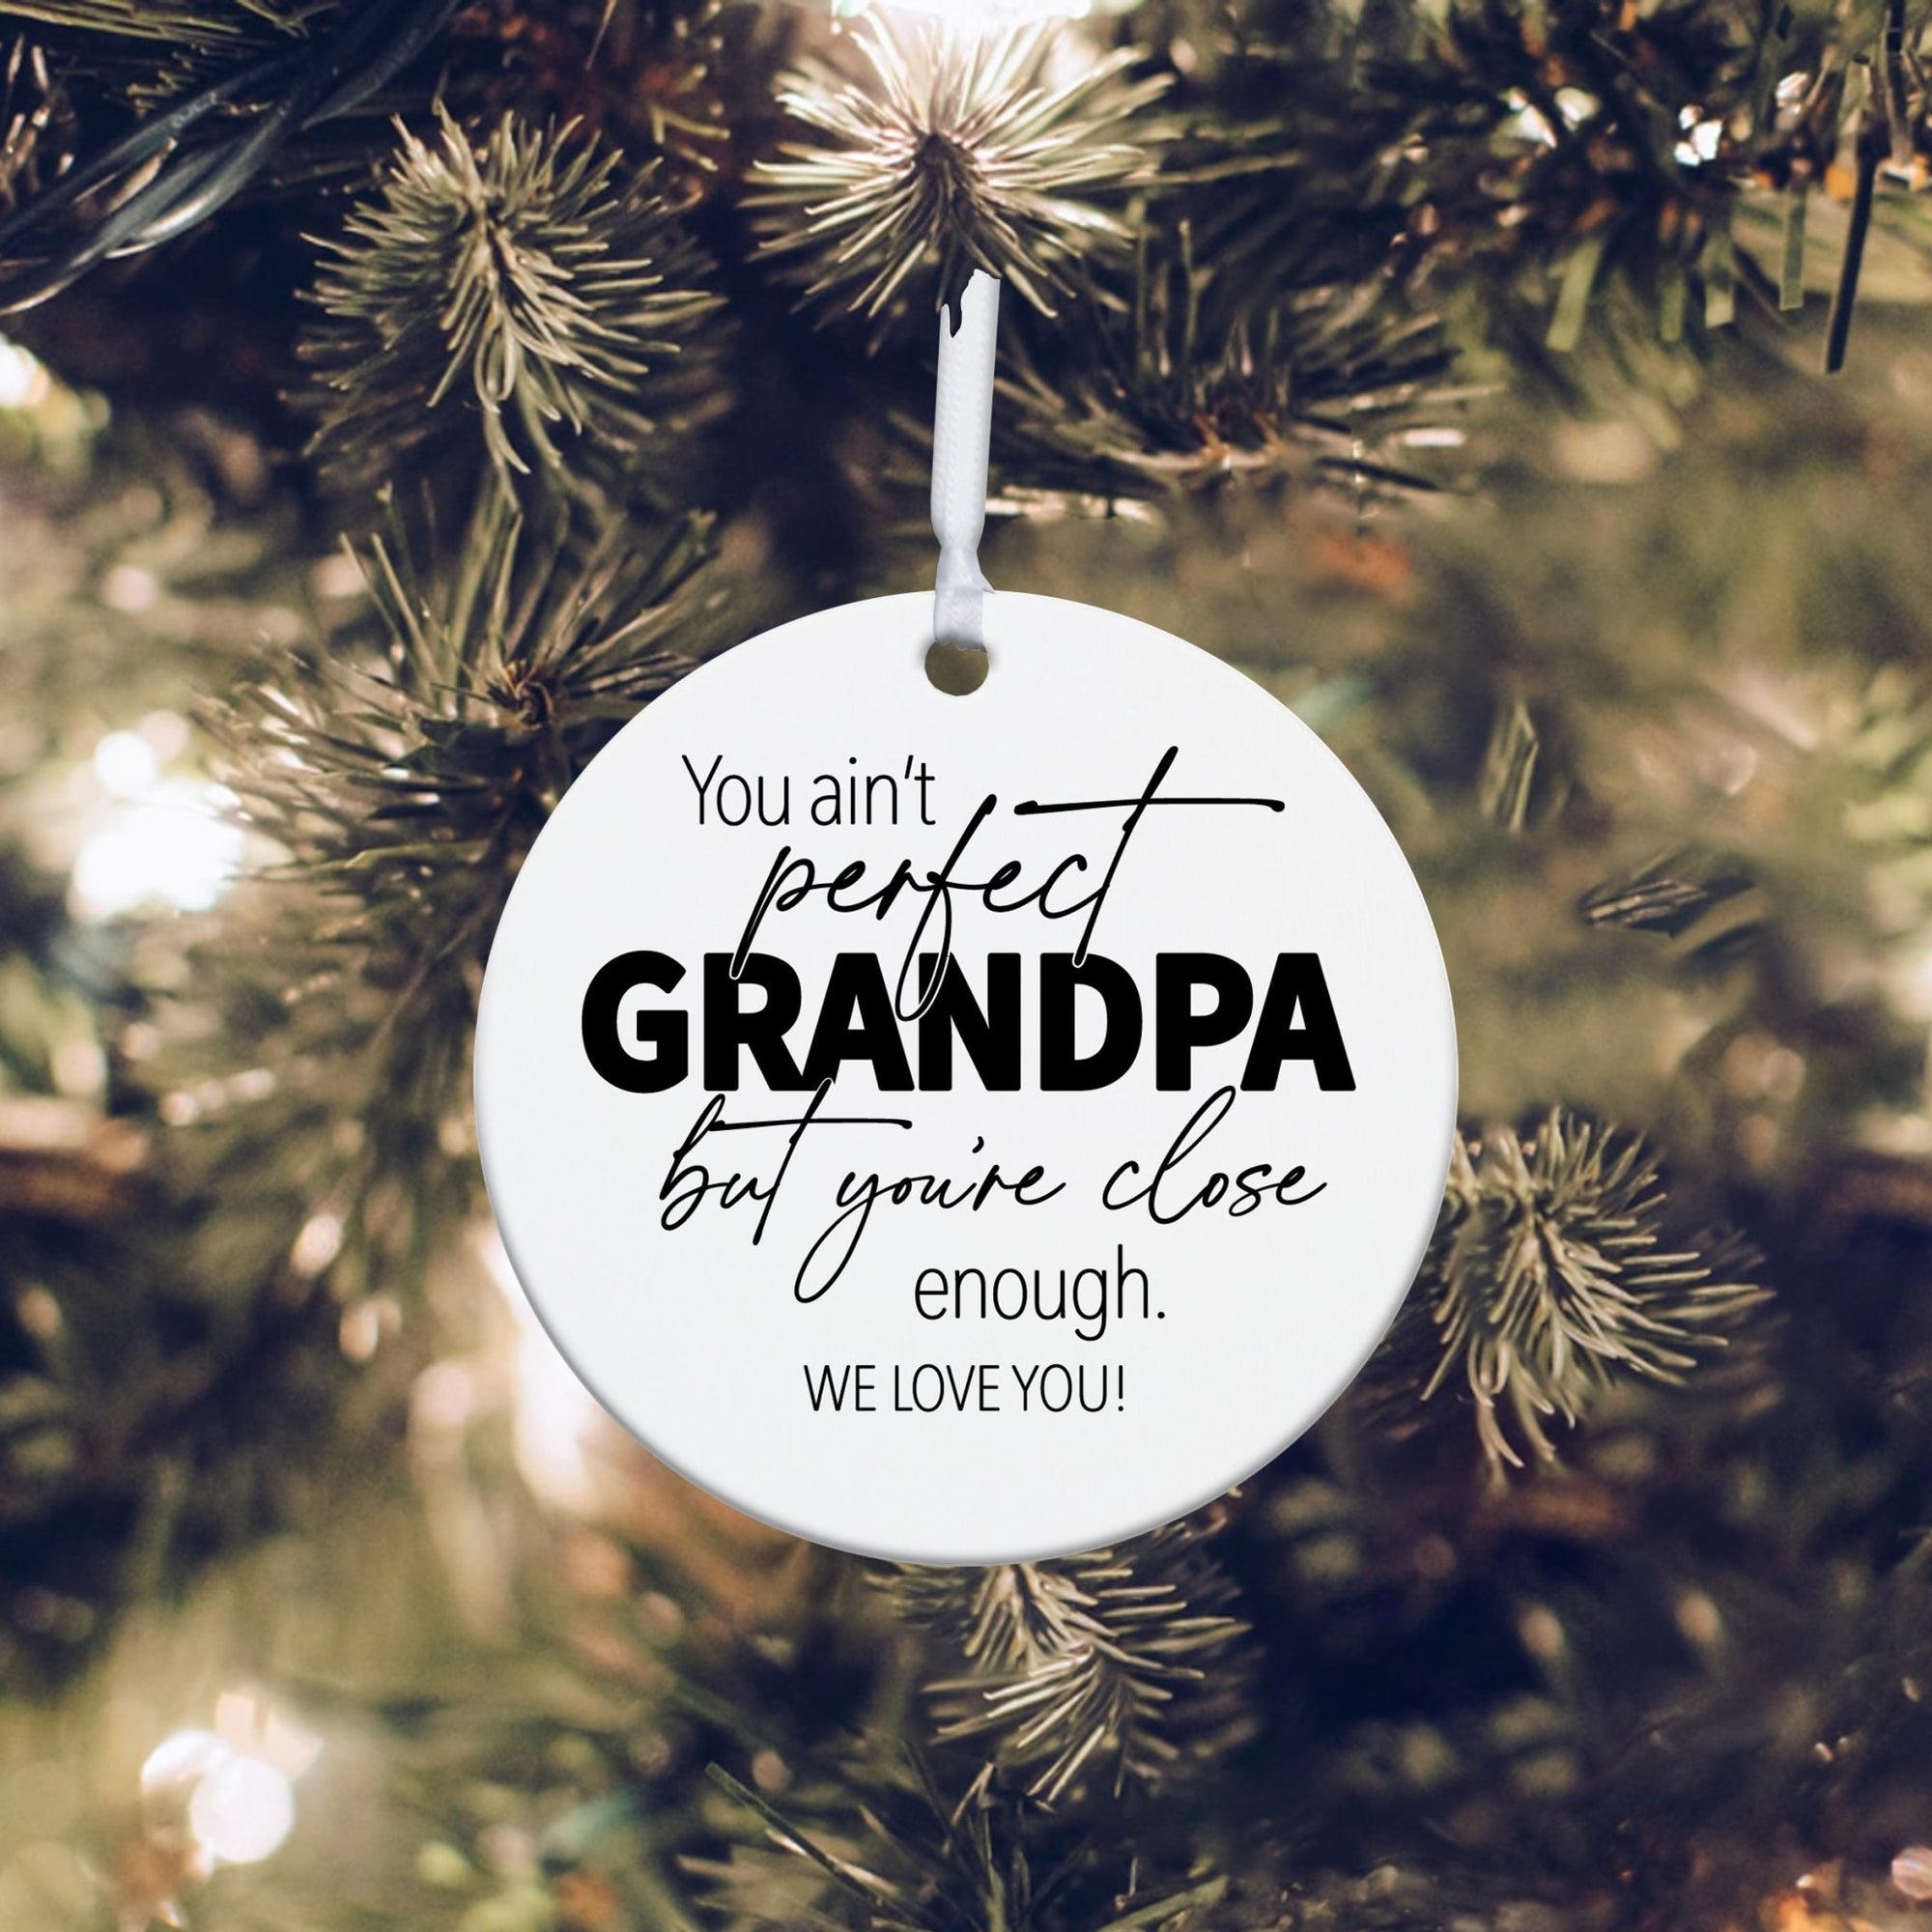 Grandparents White Ornament With Inspirational Message Gift Ideas - You Ain't Perfect Grandpa - LifeSong Milestones